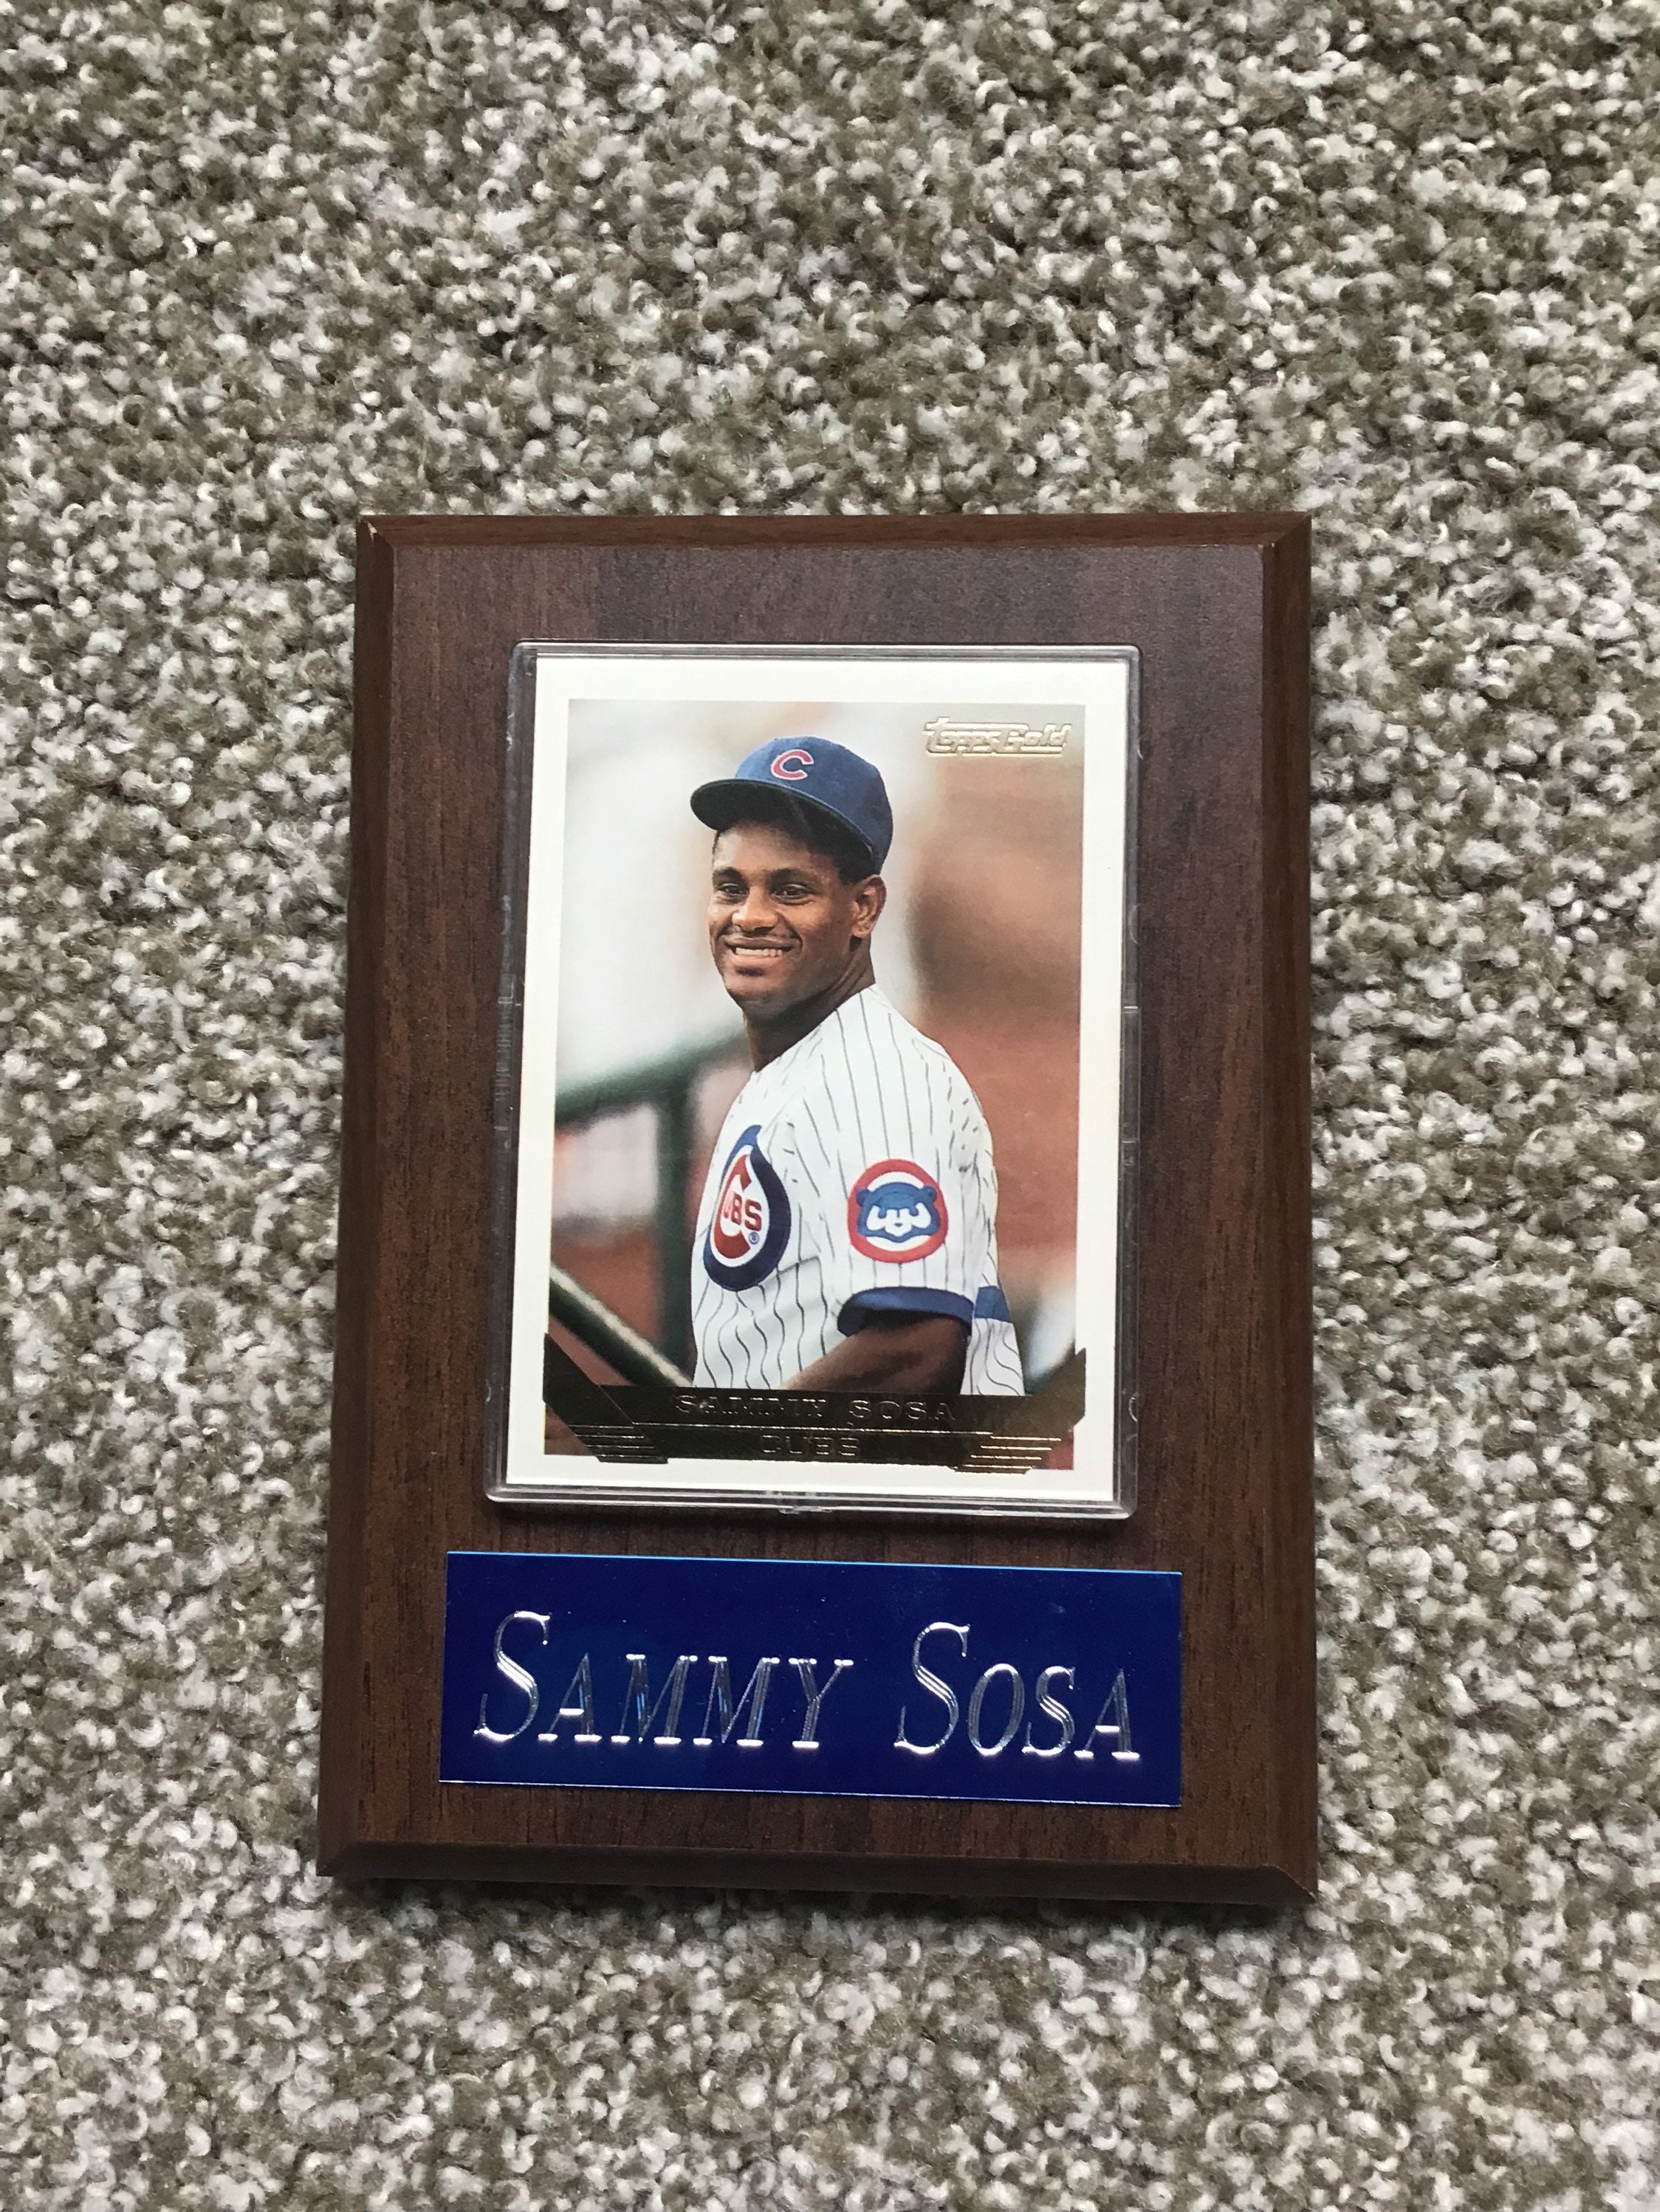 Chicago Cubs Slugger Sammy Sosa Topps Gold Vintage Baseball Card Plaque  Awesome Collectible & Rare Mint Great Item